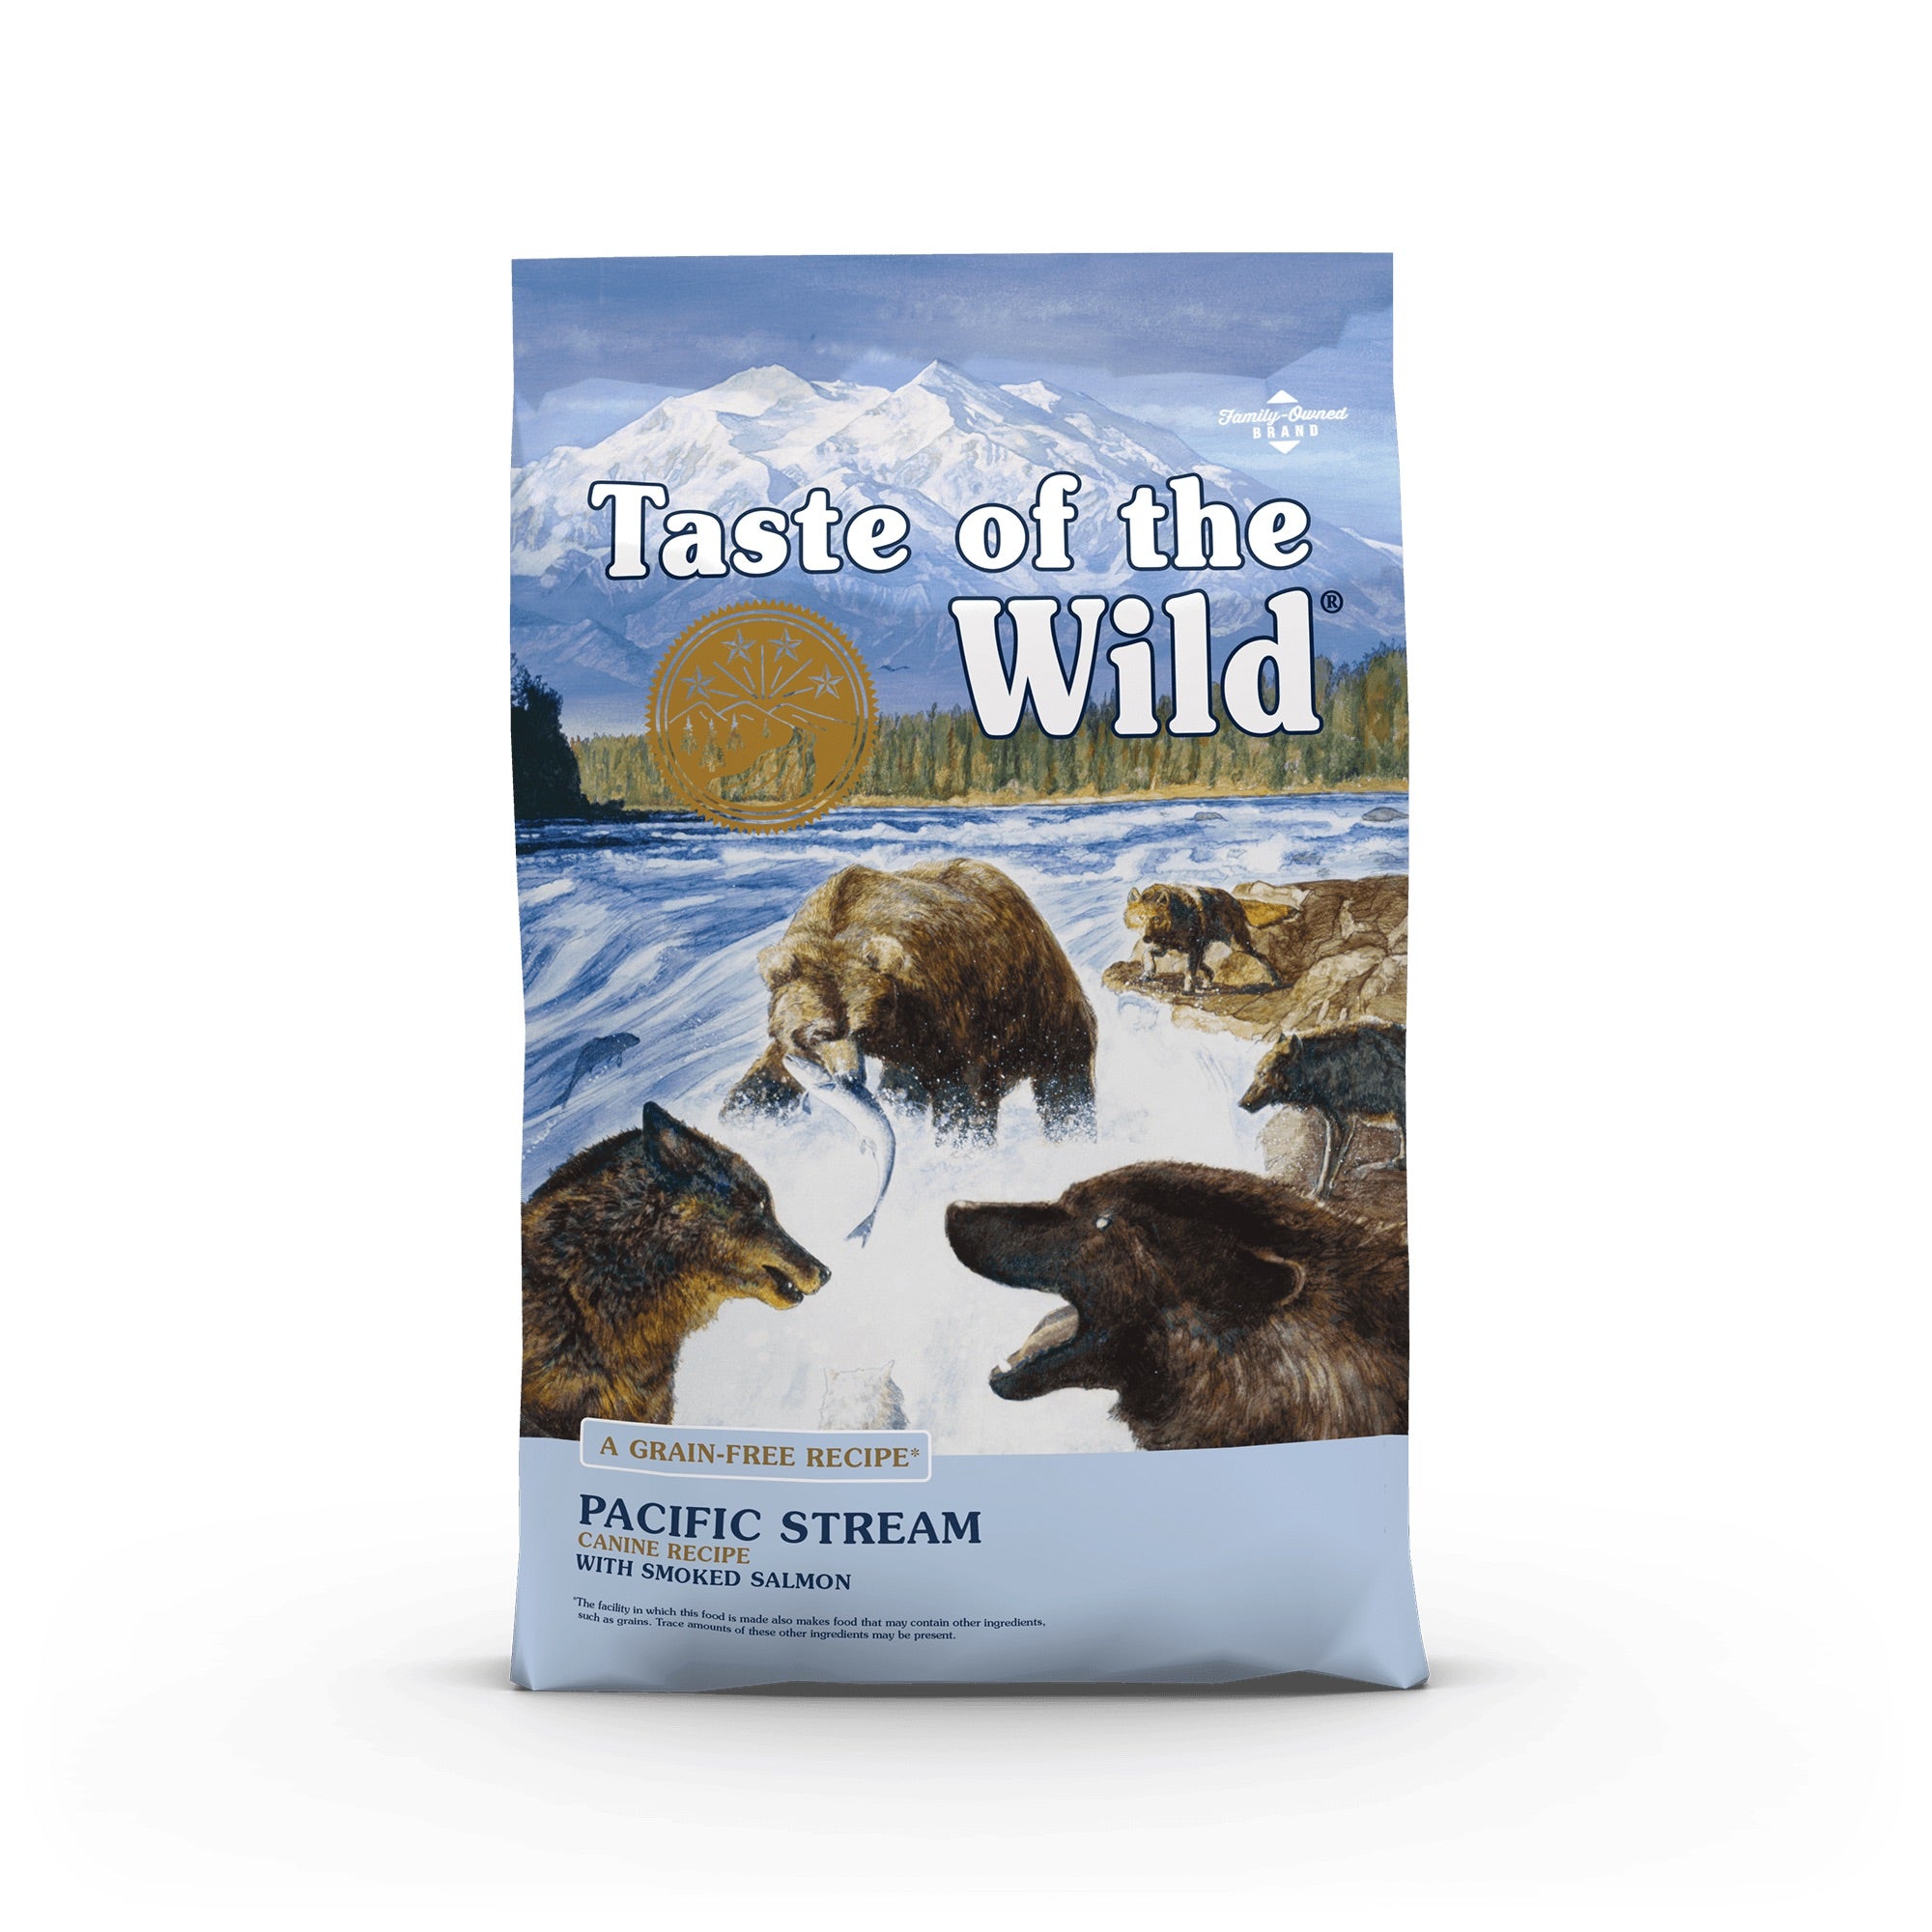 Taste of the Wild Pacific Stream Canine 14 LB